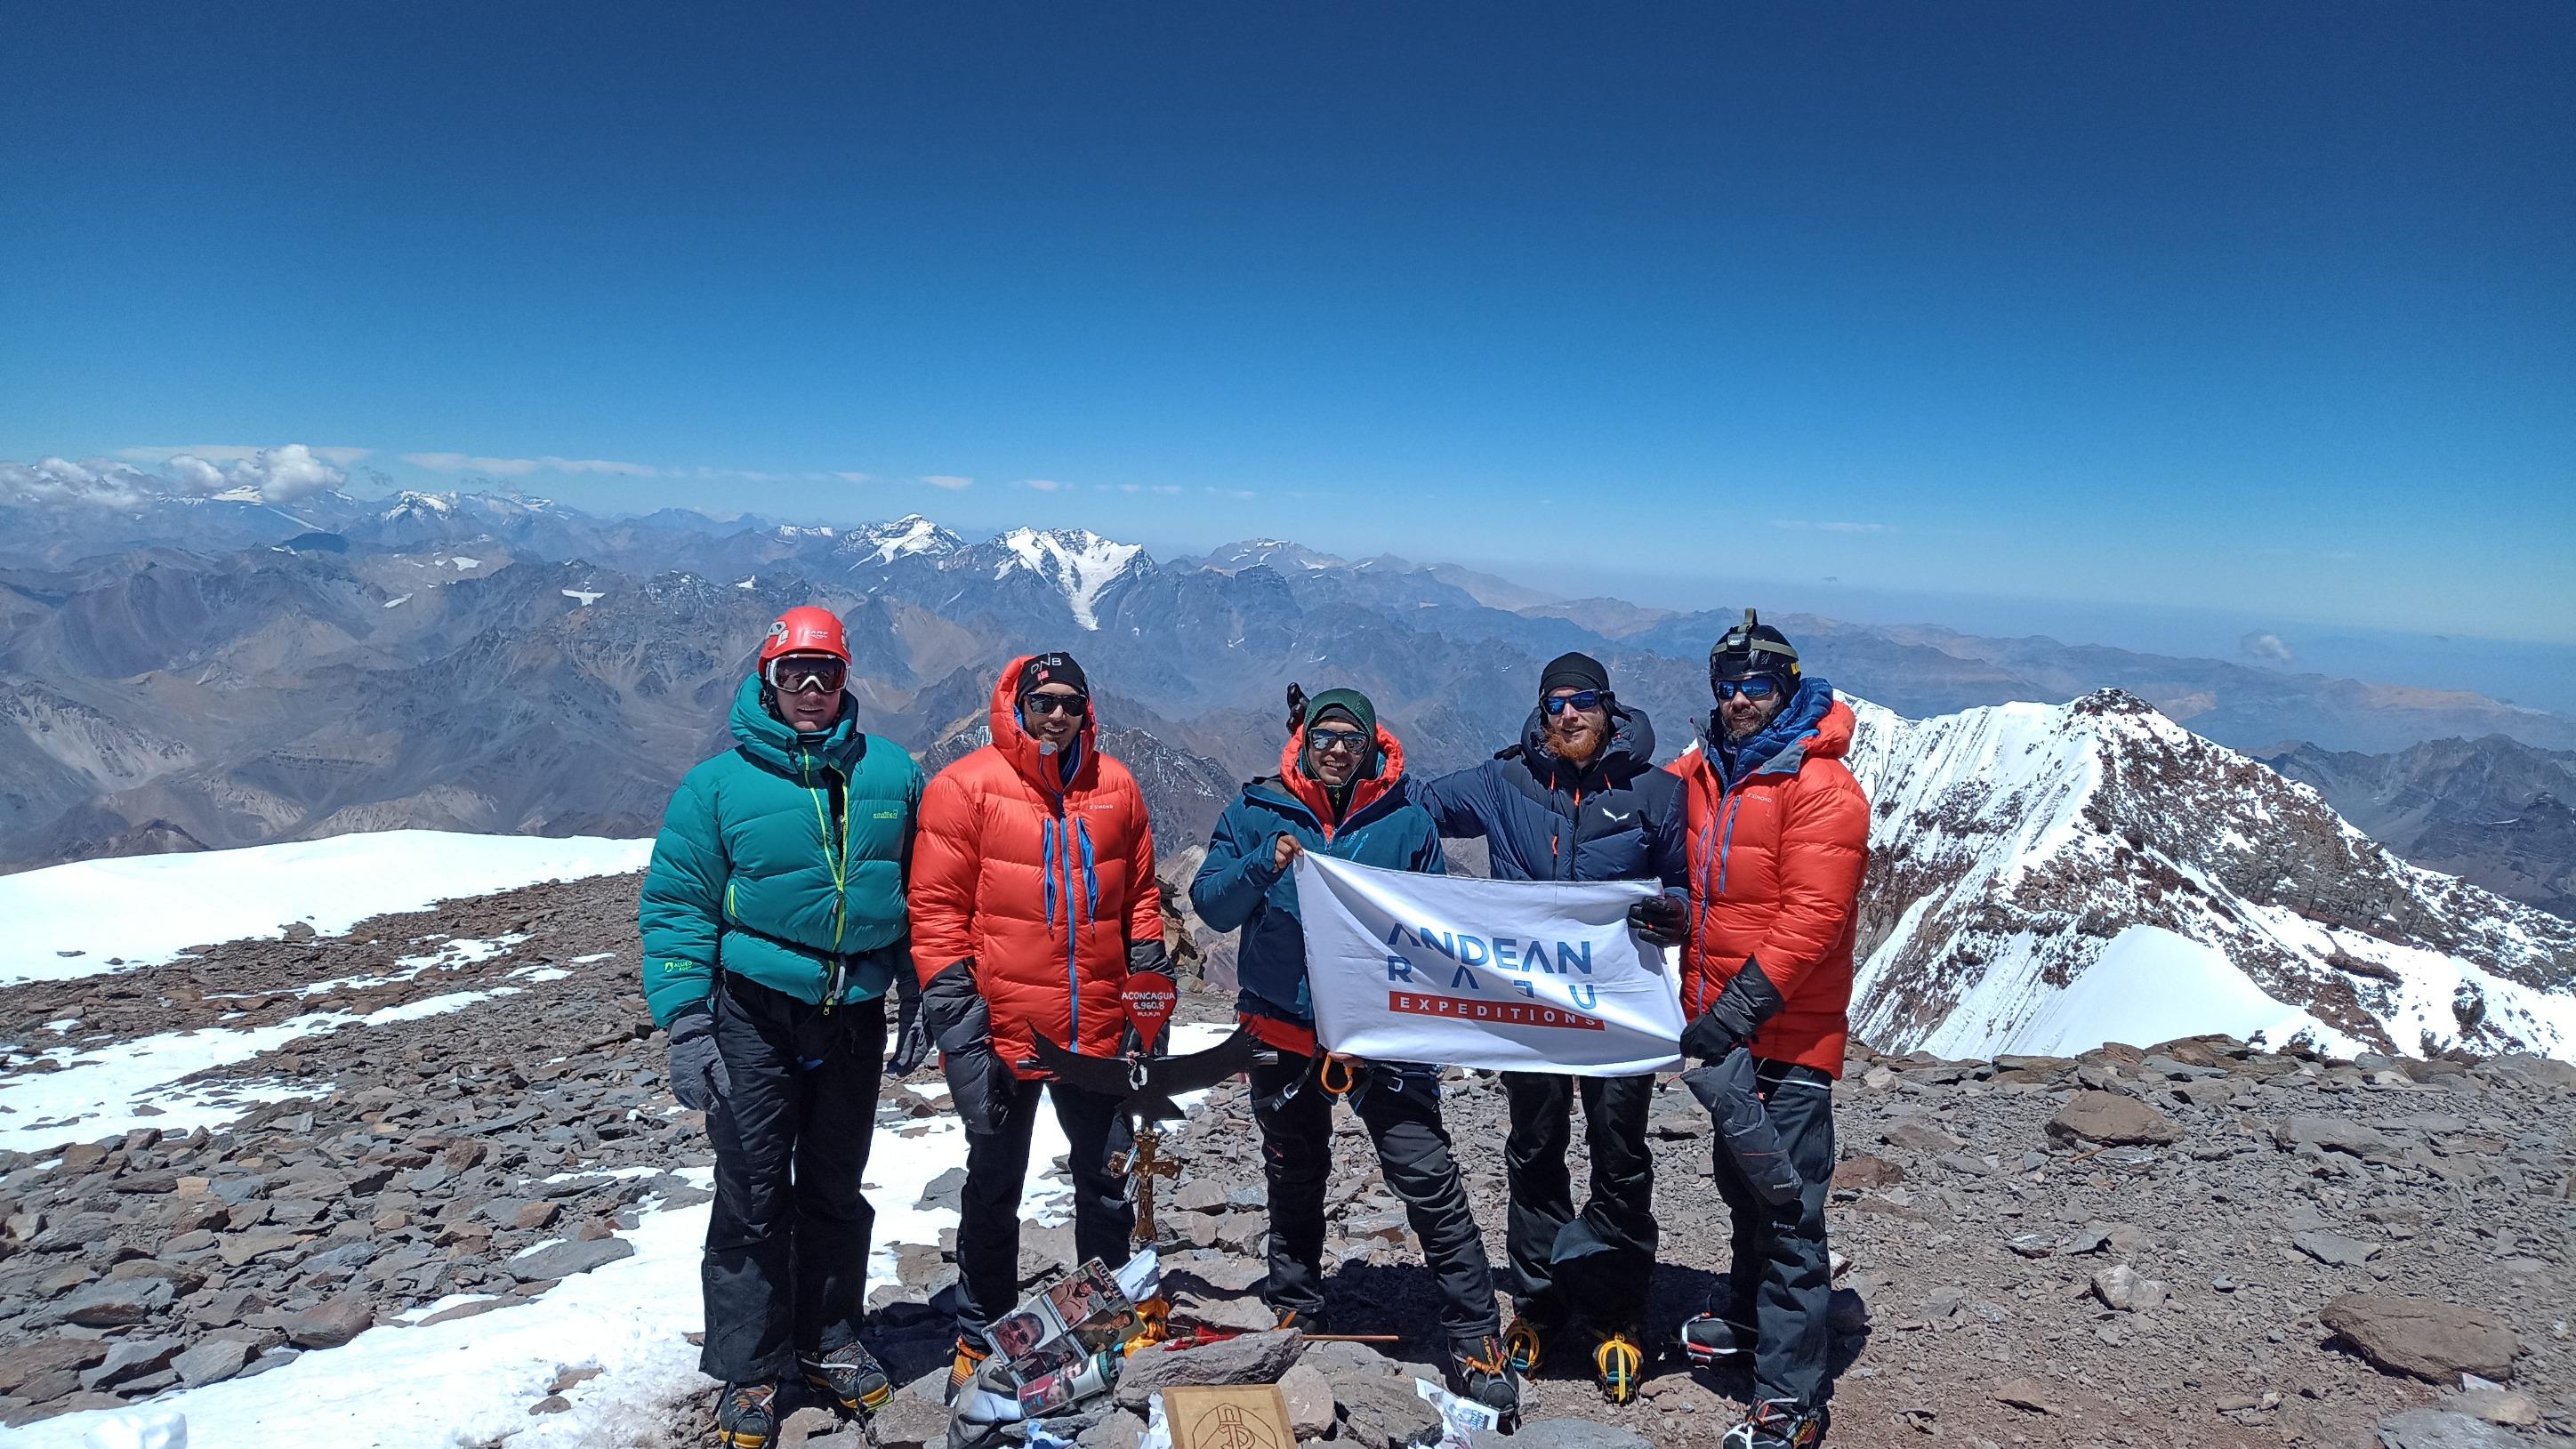 Aconcagua Expedition Via The Normal Route